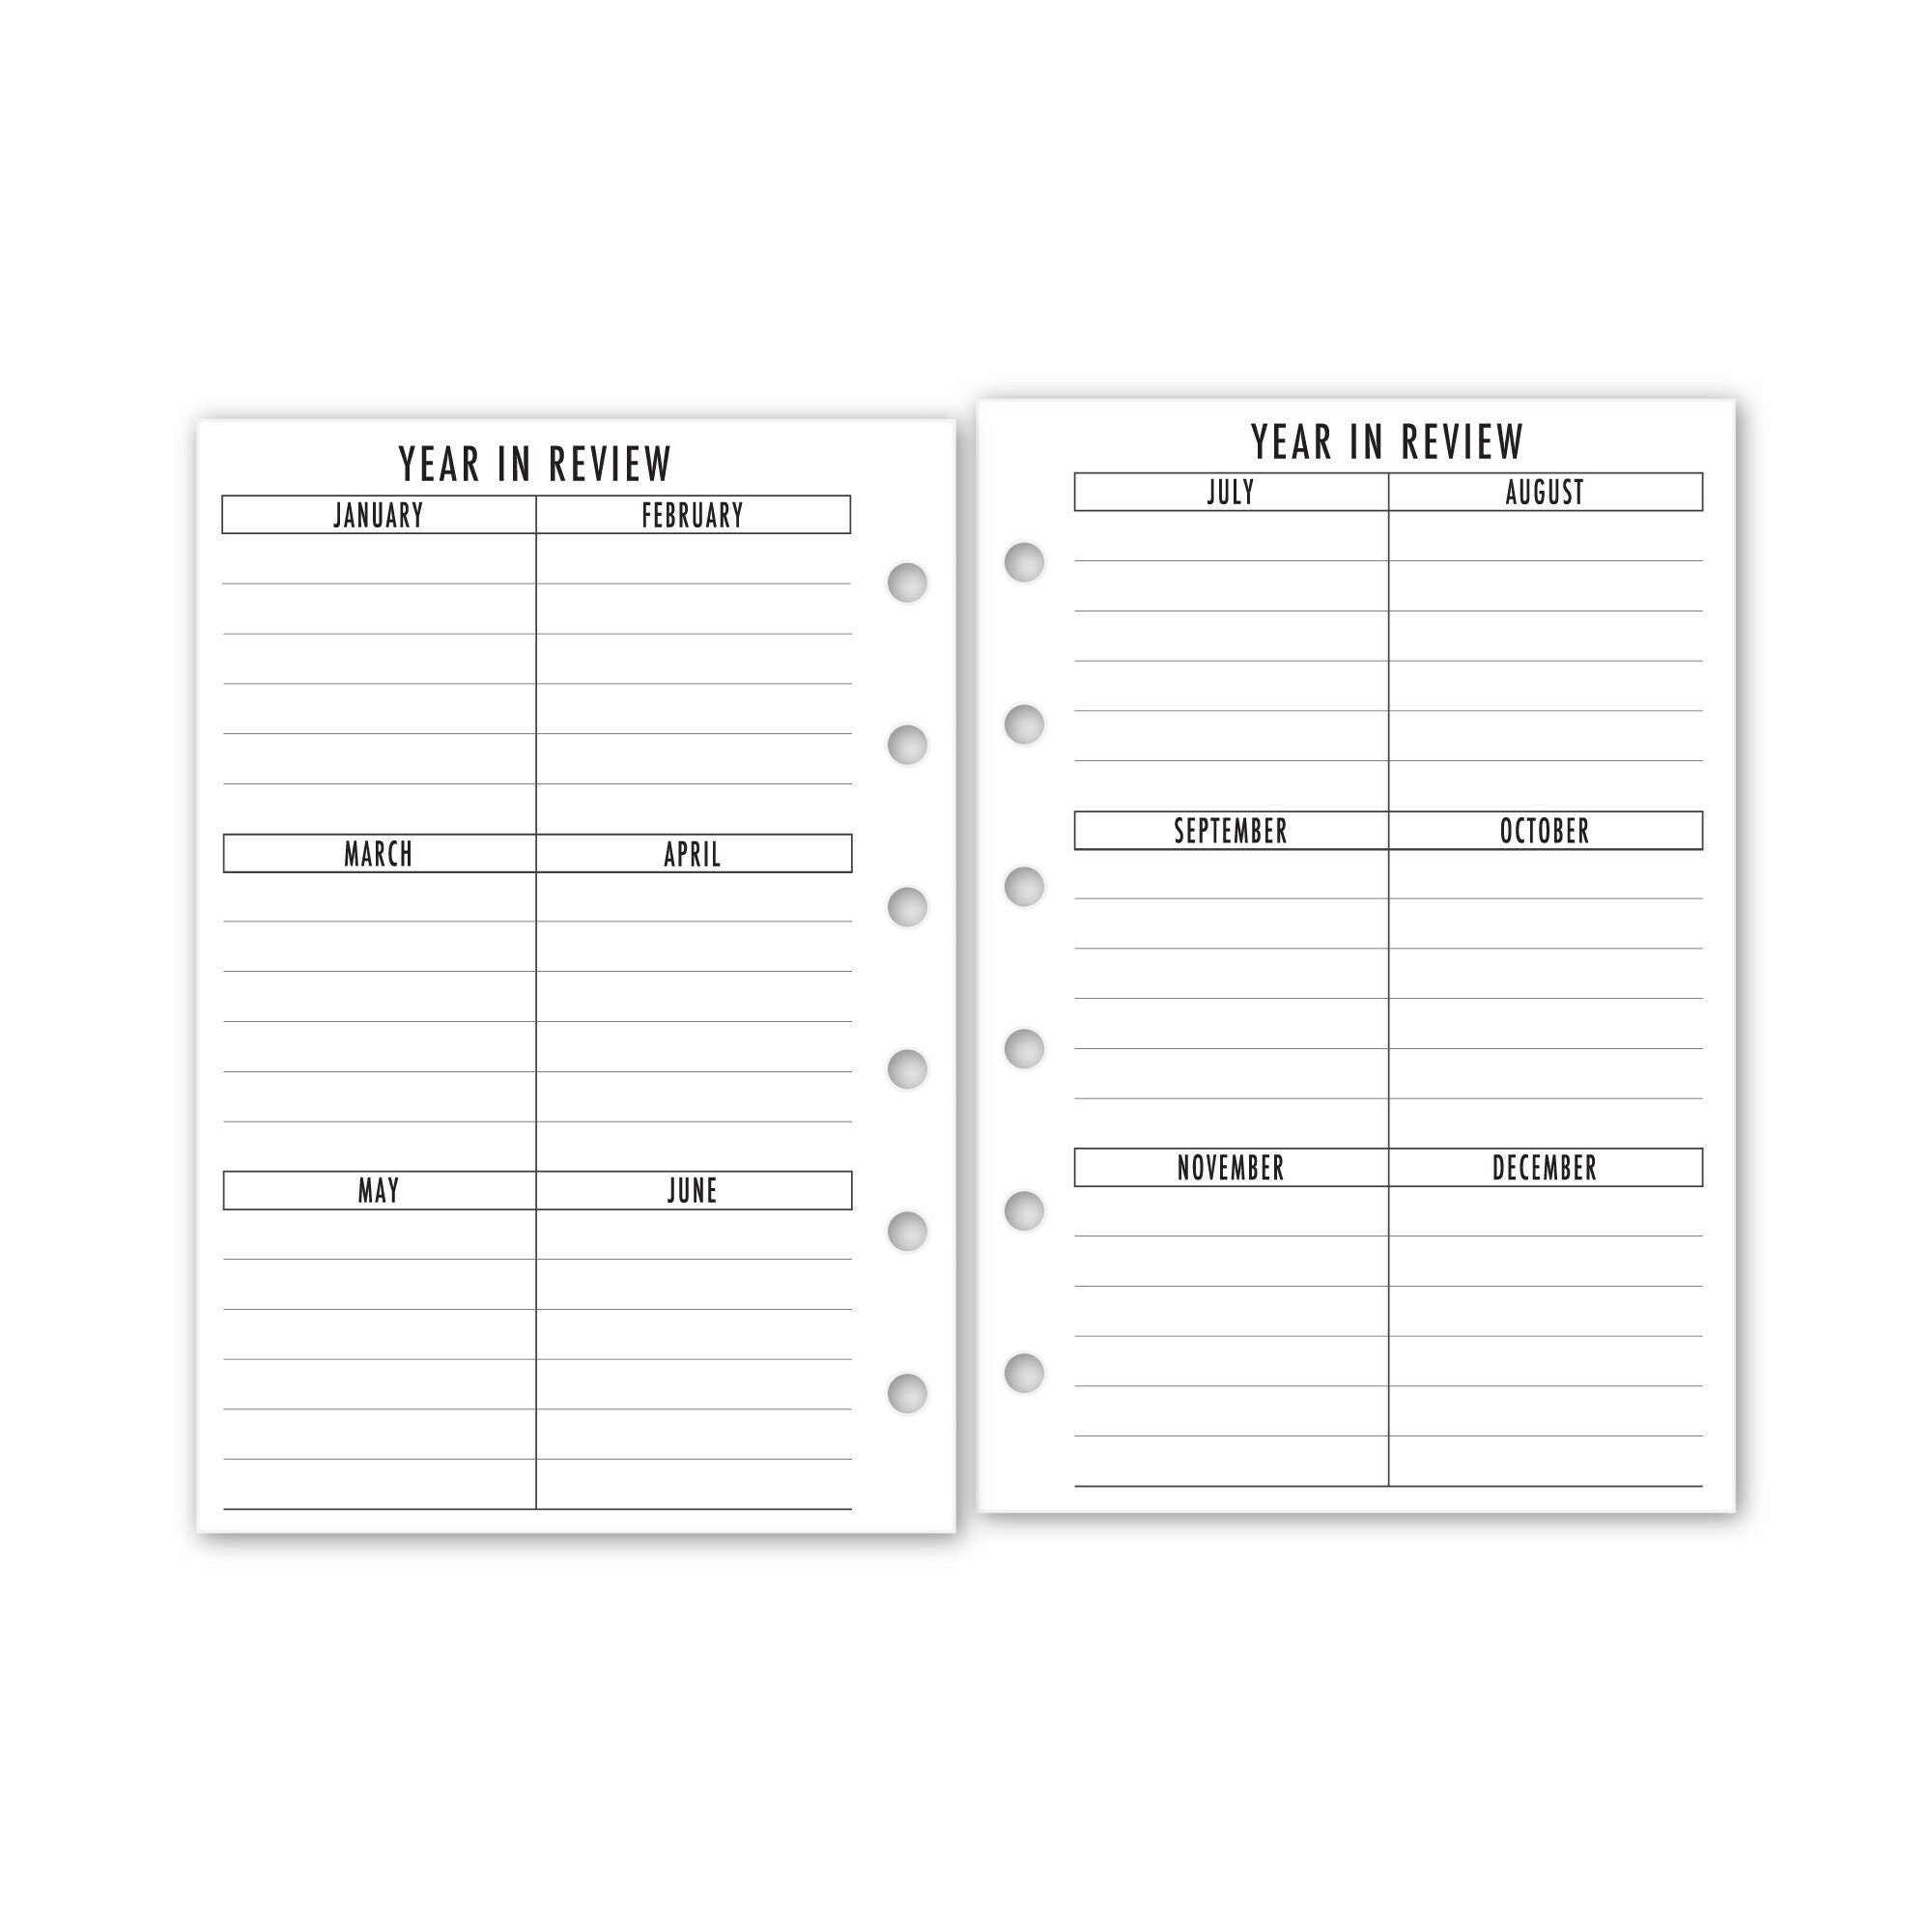 Foiled Pocket Rings Month on 2 Pages Deluxe Planner Calendar Refill, 3.2 x  4.7  81mm x 120mm, Sunday Start, Dated Monthly View, Choose 12 Months :  Handmade Products 